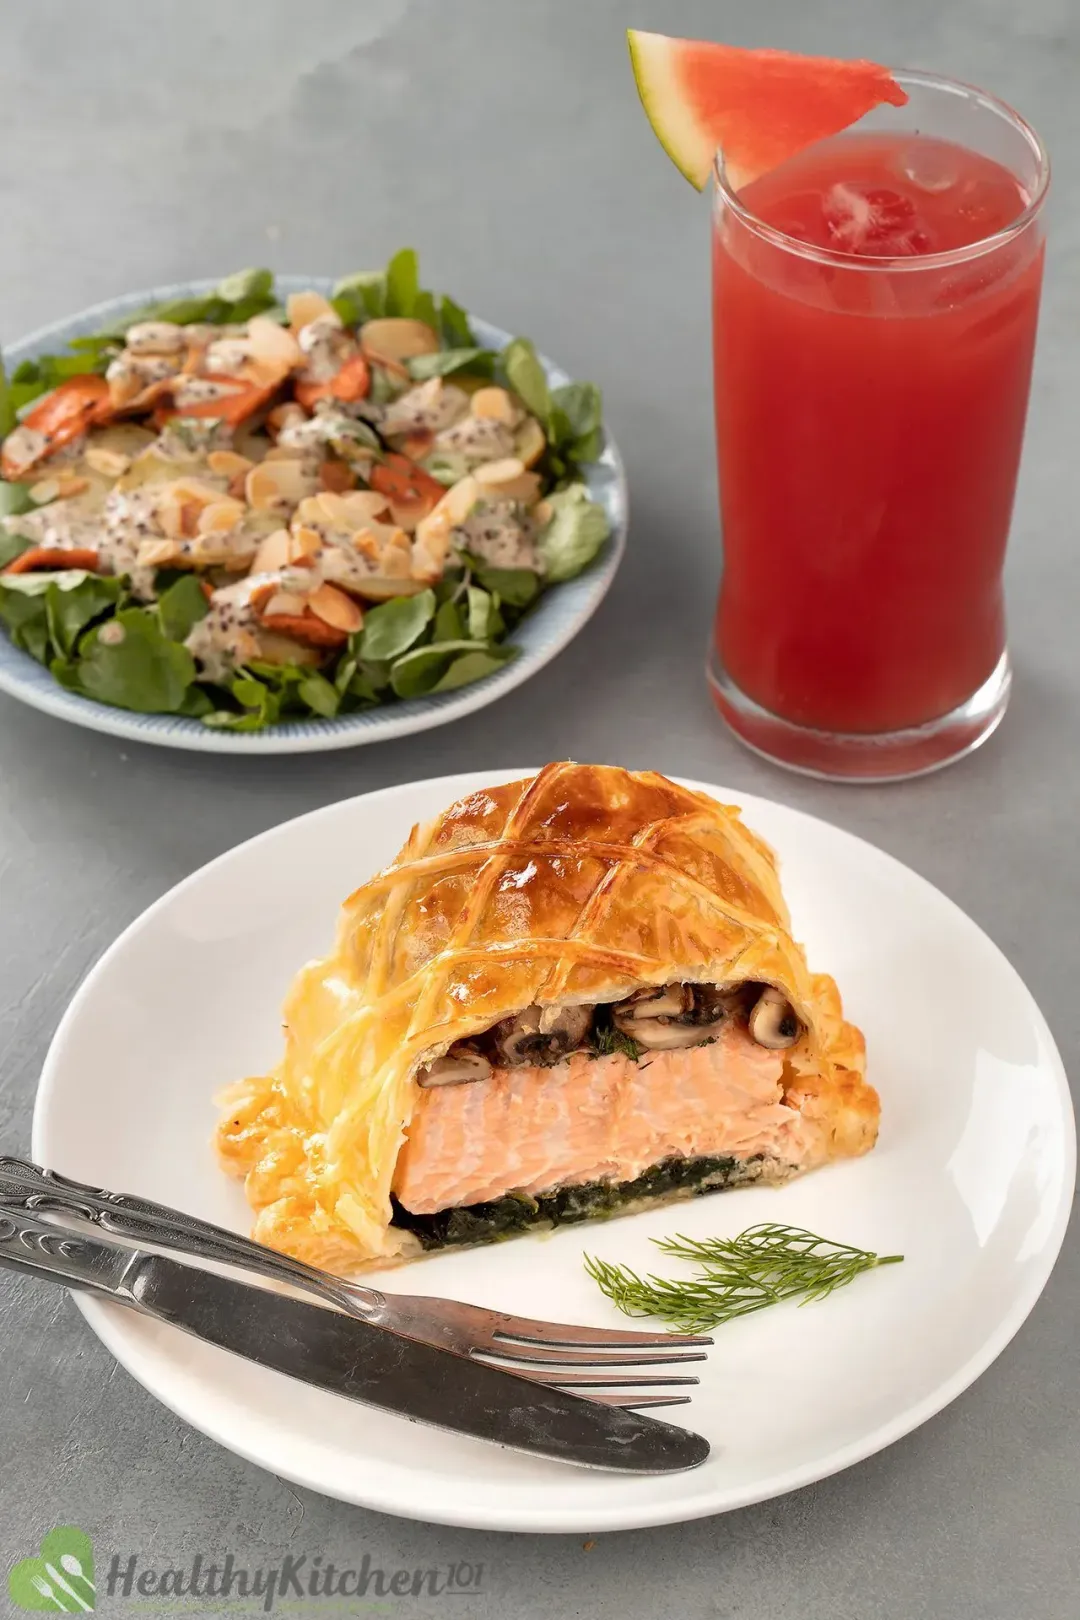 A plate of salmon en croute, a dinner knife, and a fork laid near a plate of mustard potato salad and a glass of watermelon juice